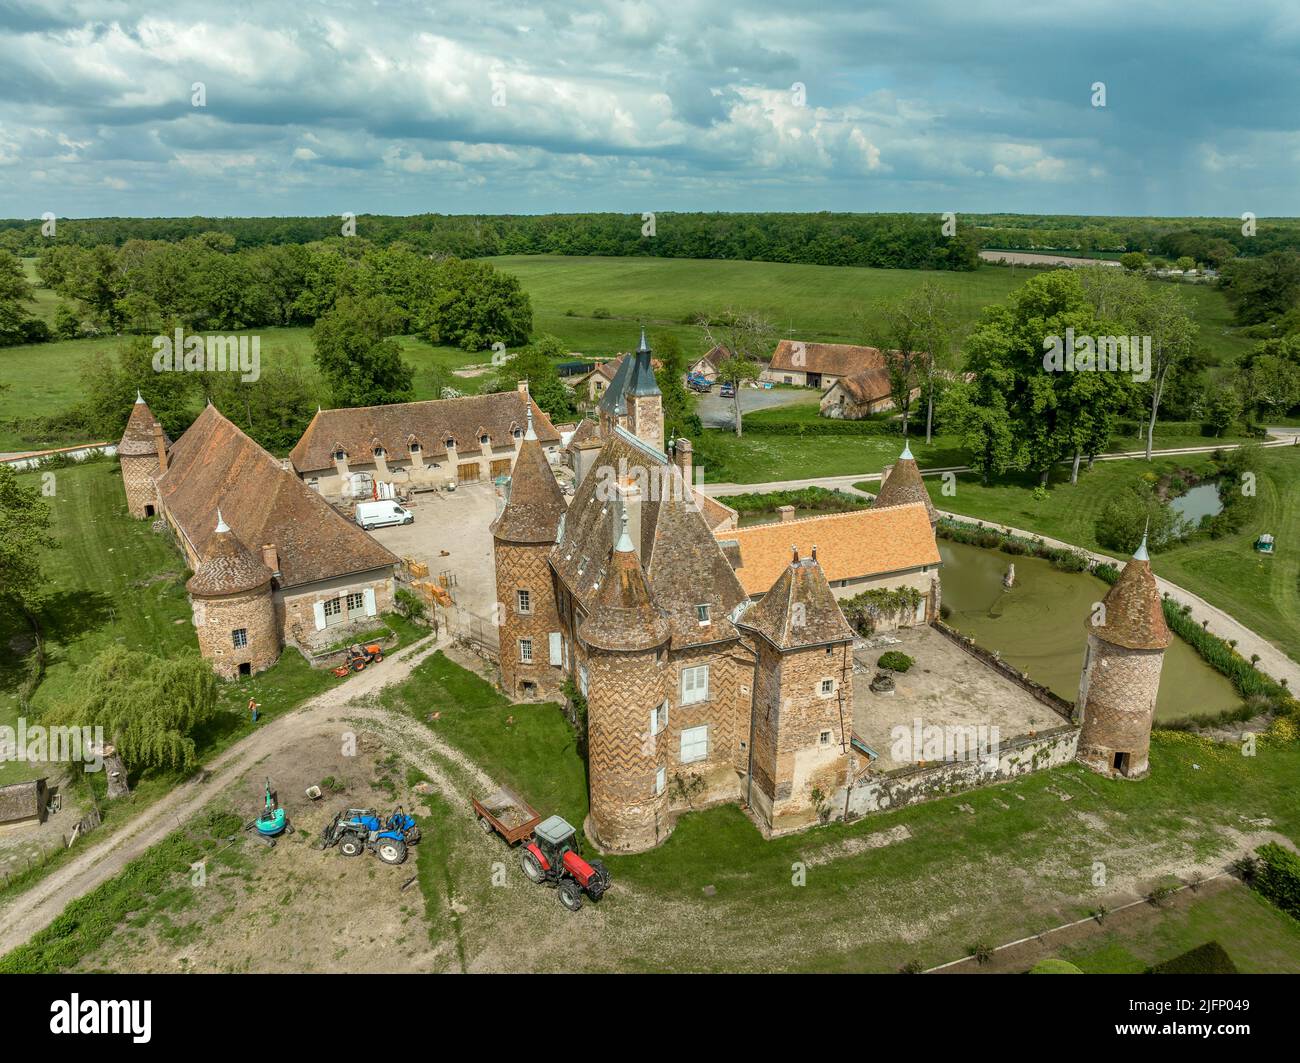 Aerial view of Chateau de la Cour-en-Chapeau in Allier France constructed with black diamond-shaped bricks on a background of red bricks, palace, gate Stock Photo